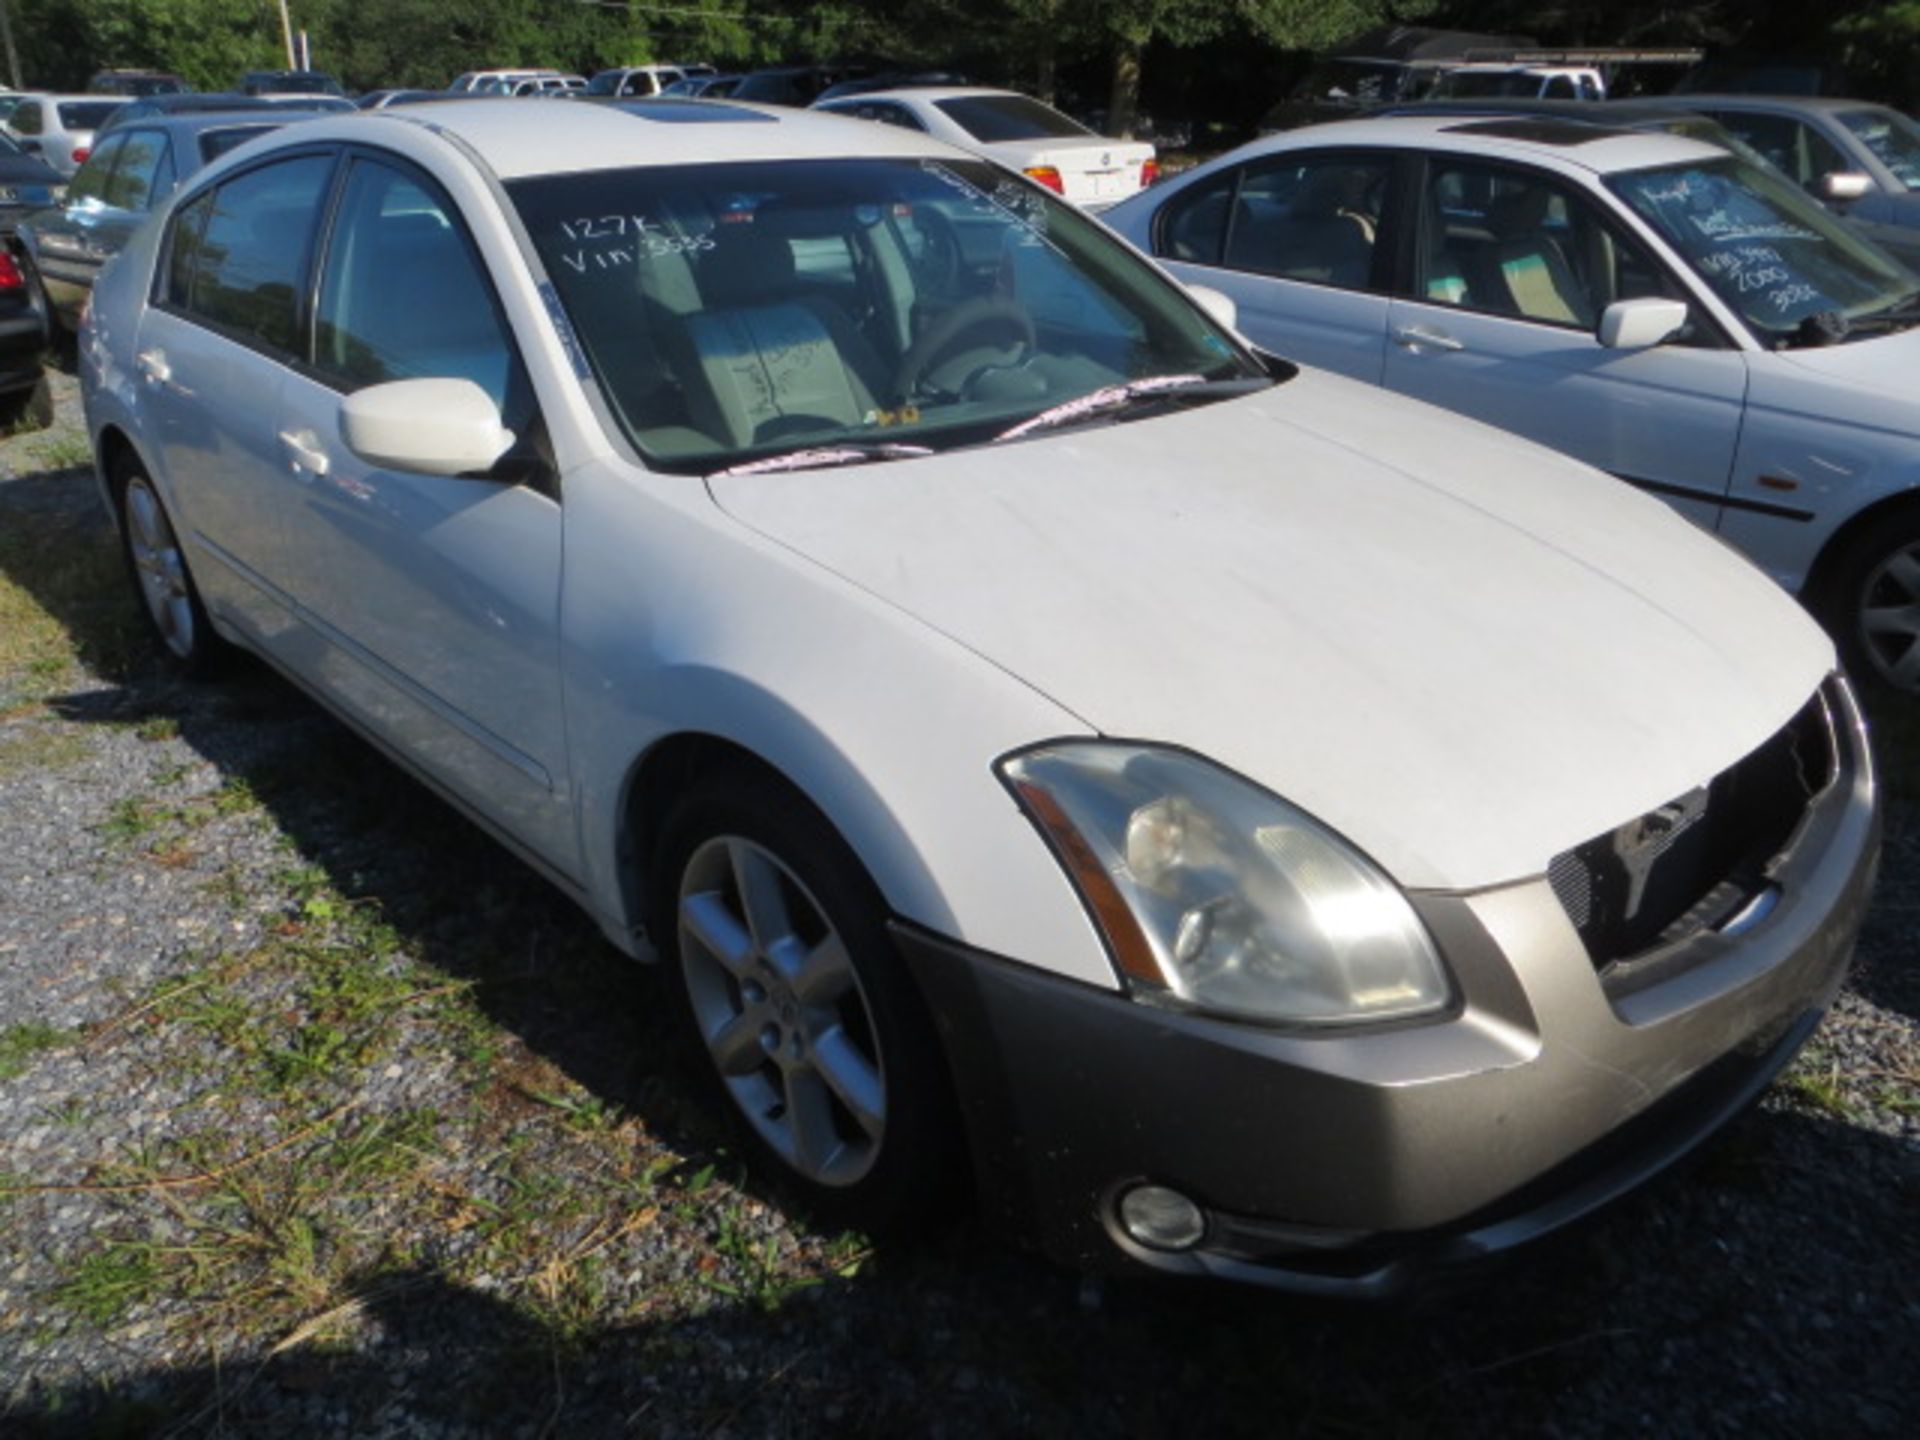 2005 Nissan Maxima-NEEDS WORK & GRILL 127000 MILES,VIN 1N4BA41E05C813535, SOLD W/ GOOD TRANSFERABLE